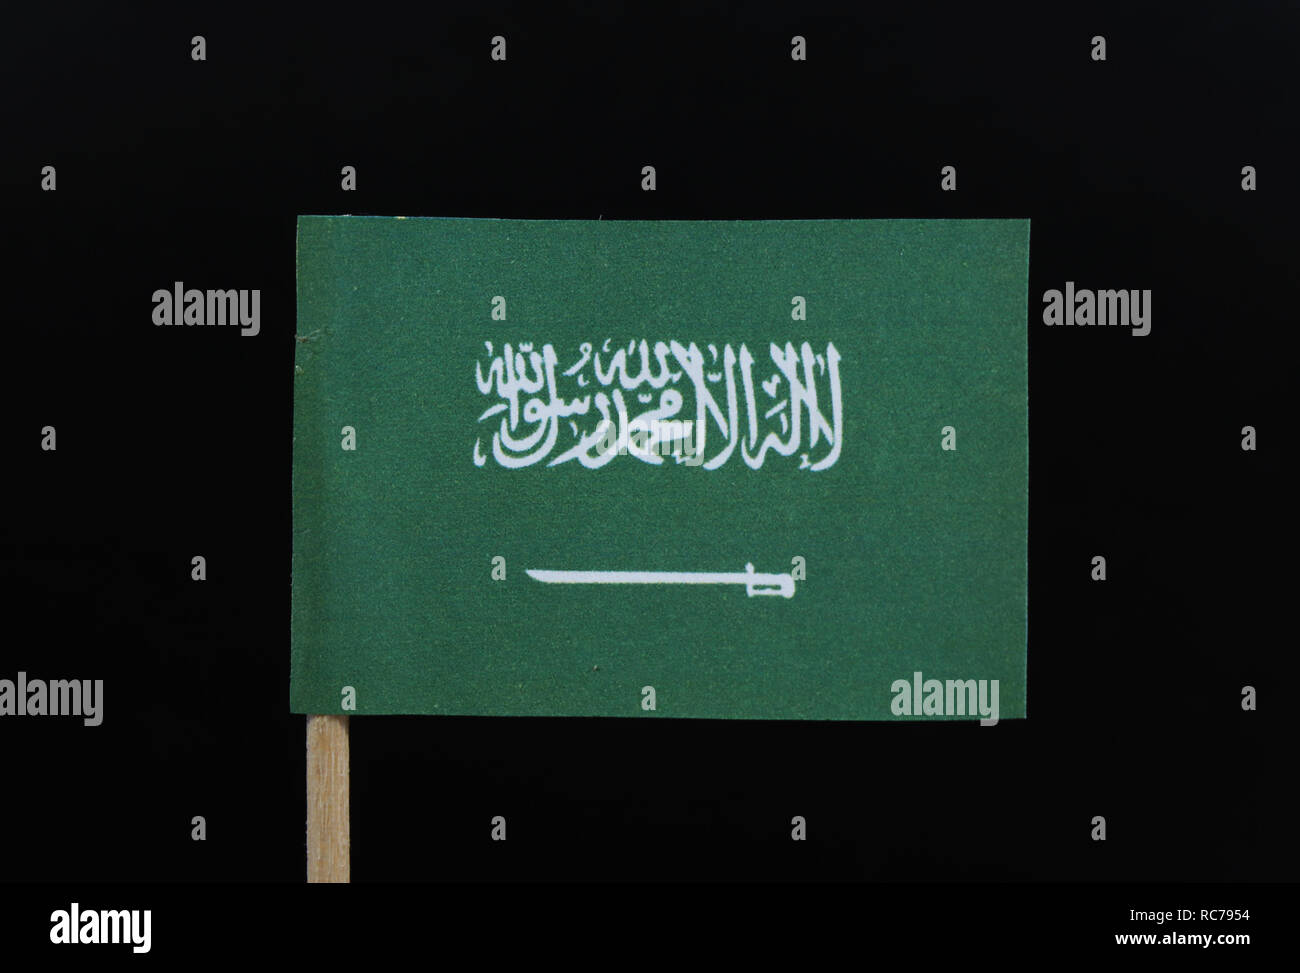 A official and unique flag of the Kingdom of Saudi Arabia on toothpick on black background. A green field with the Shahada or Muslim creed. Stock Photo